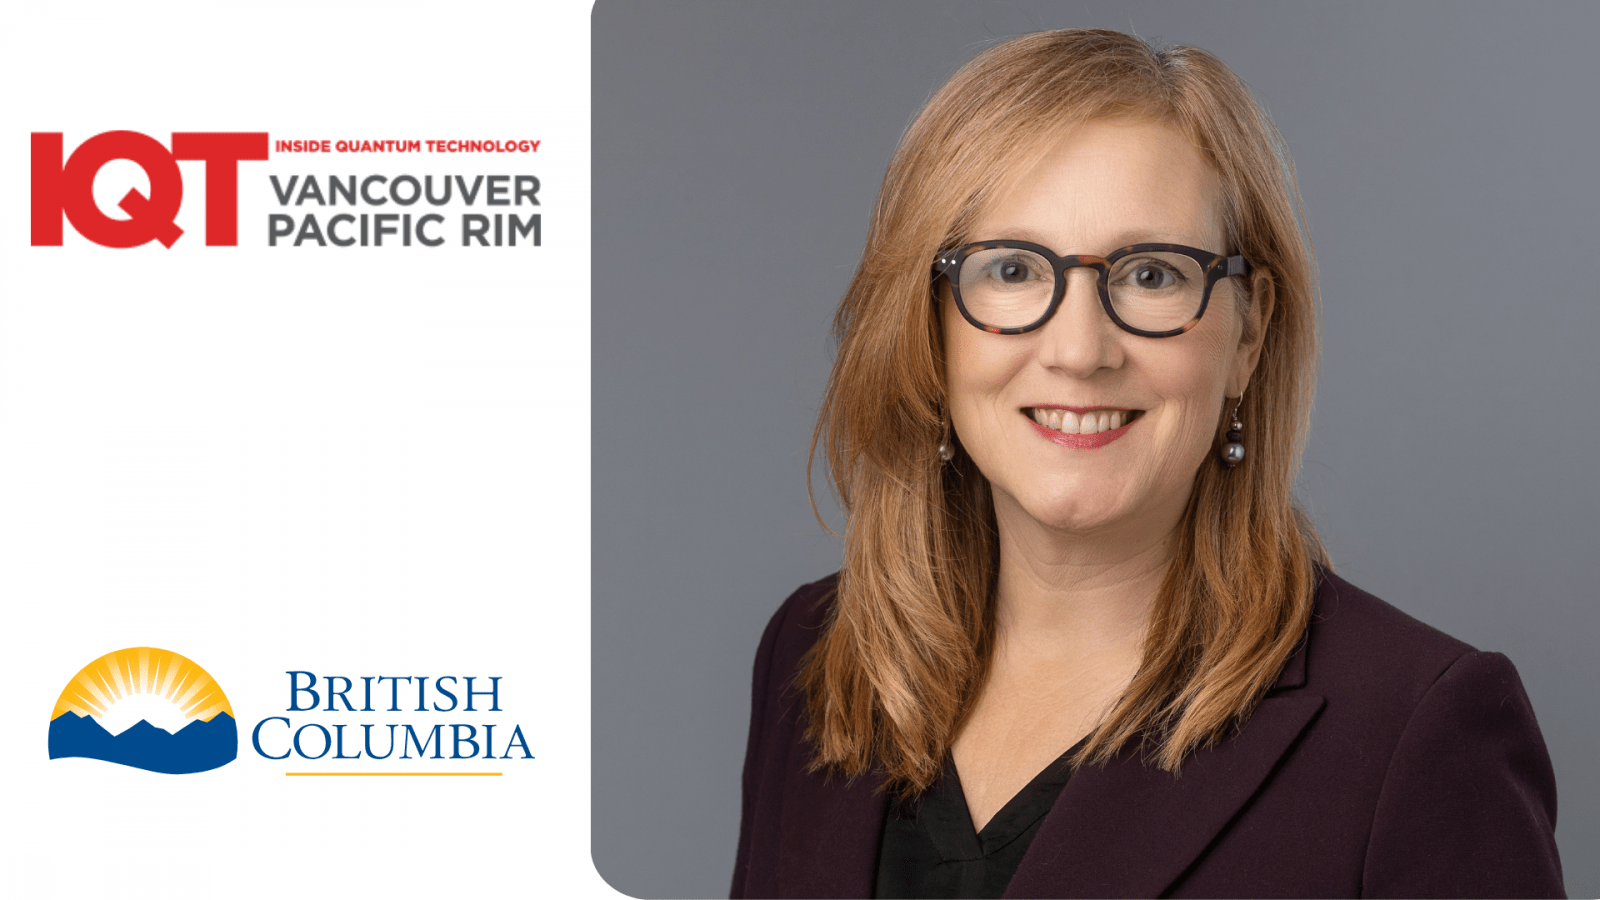 Honorable Brenda Bailey, Minister of Jobs, Economic Development and Innovation for the Government of British Columbia is a 2024 IQT Vancouver/Pacific Rim Speaker